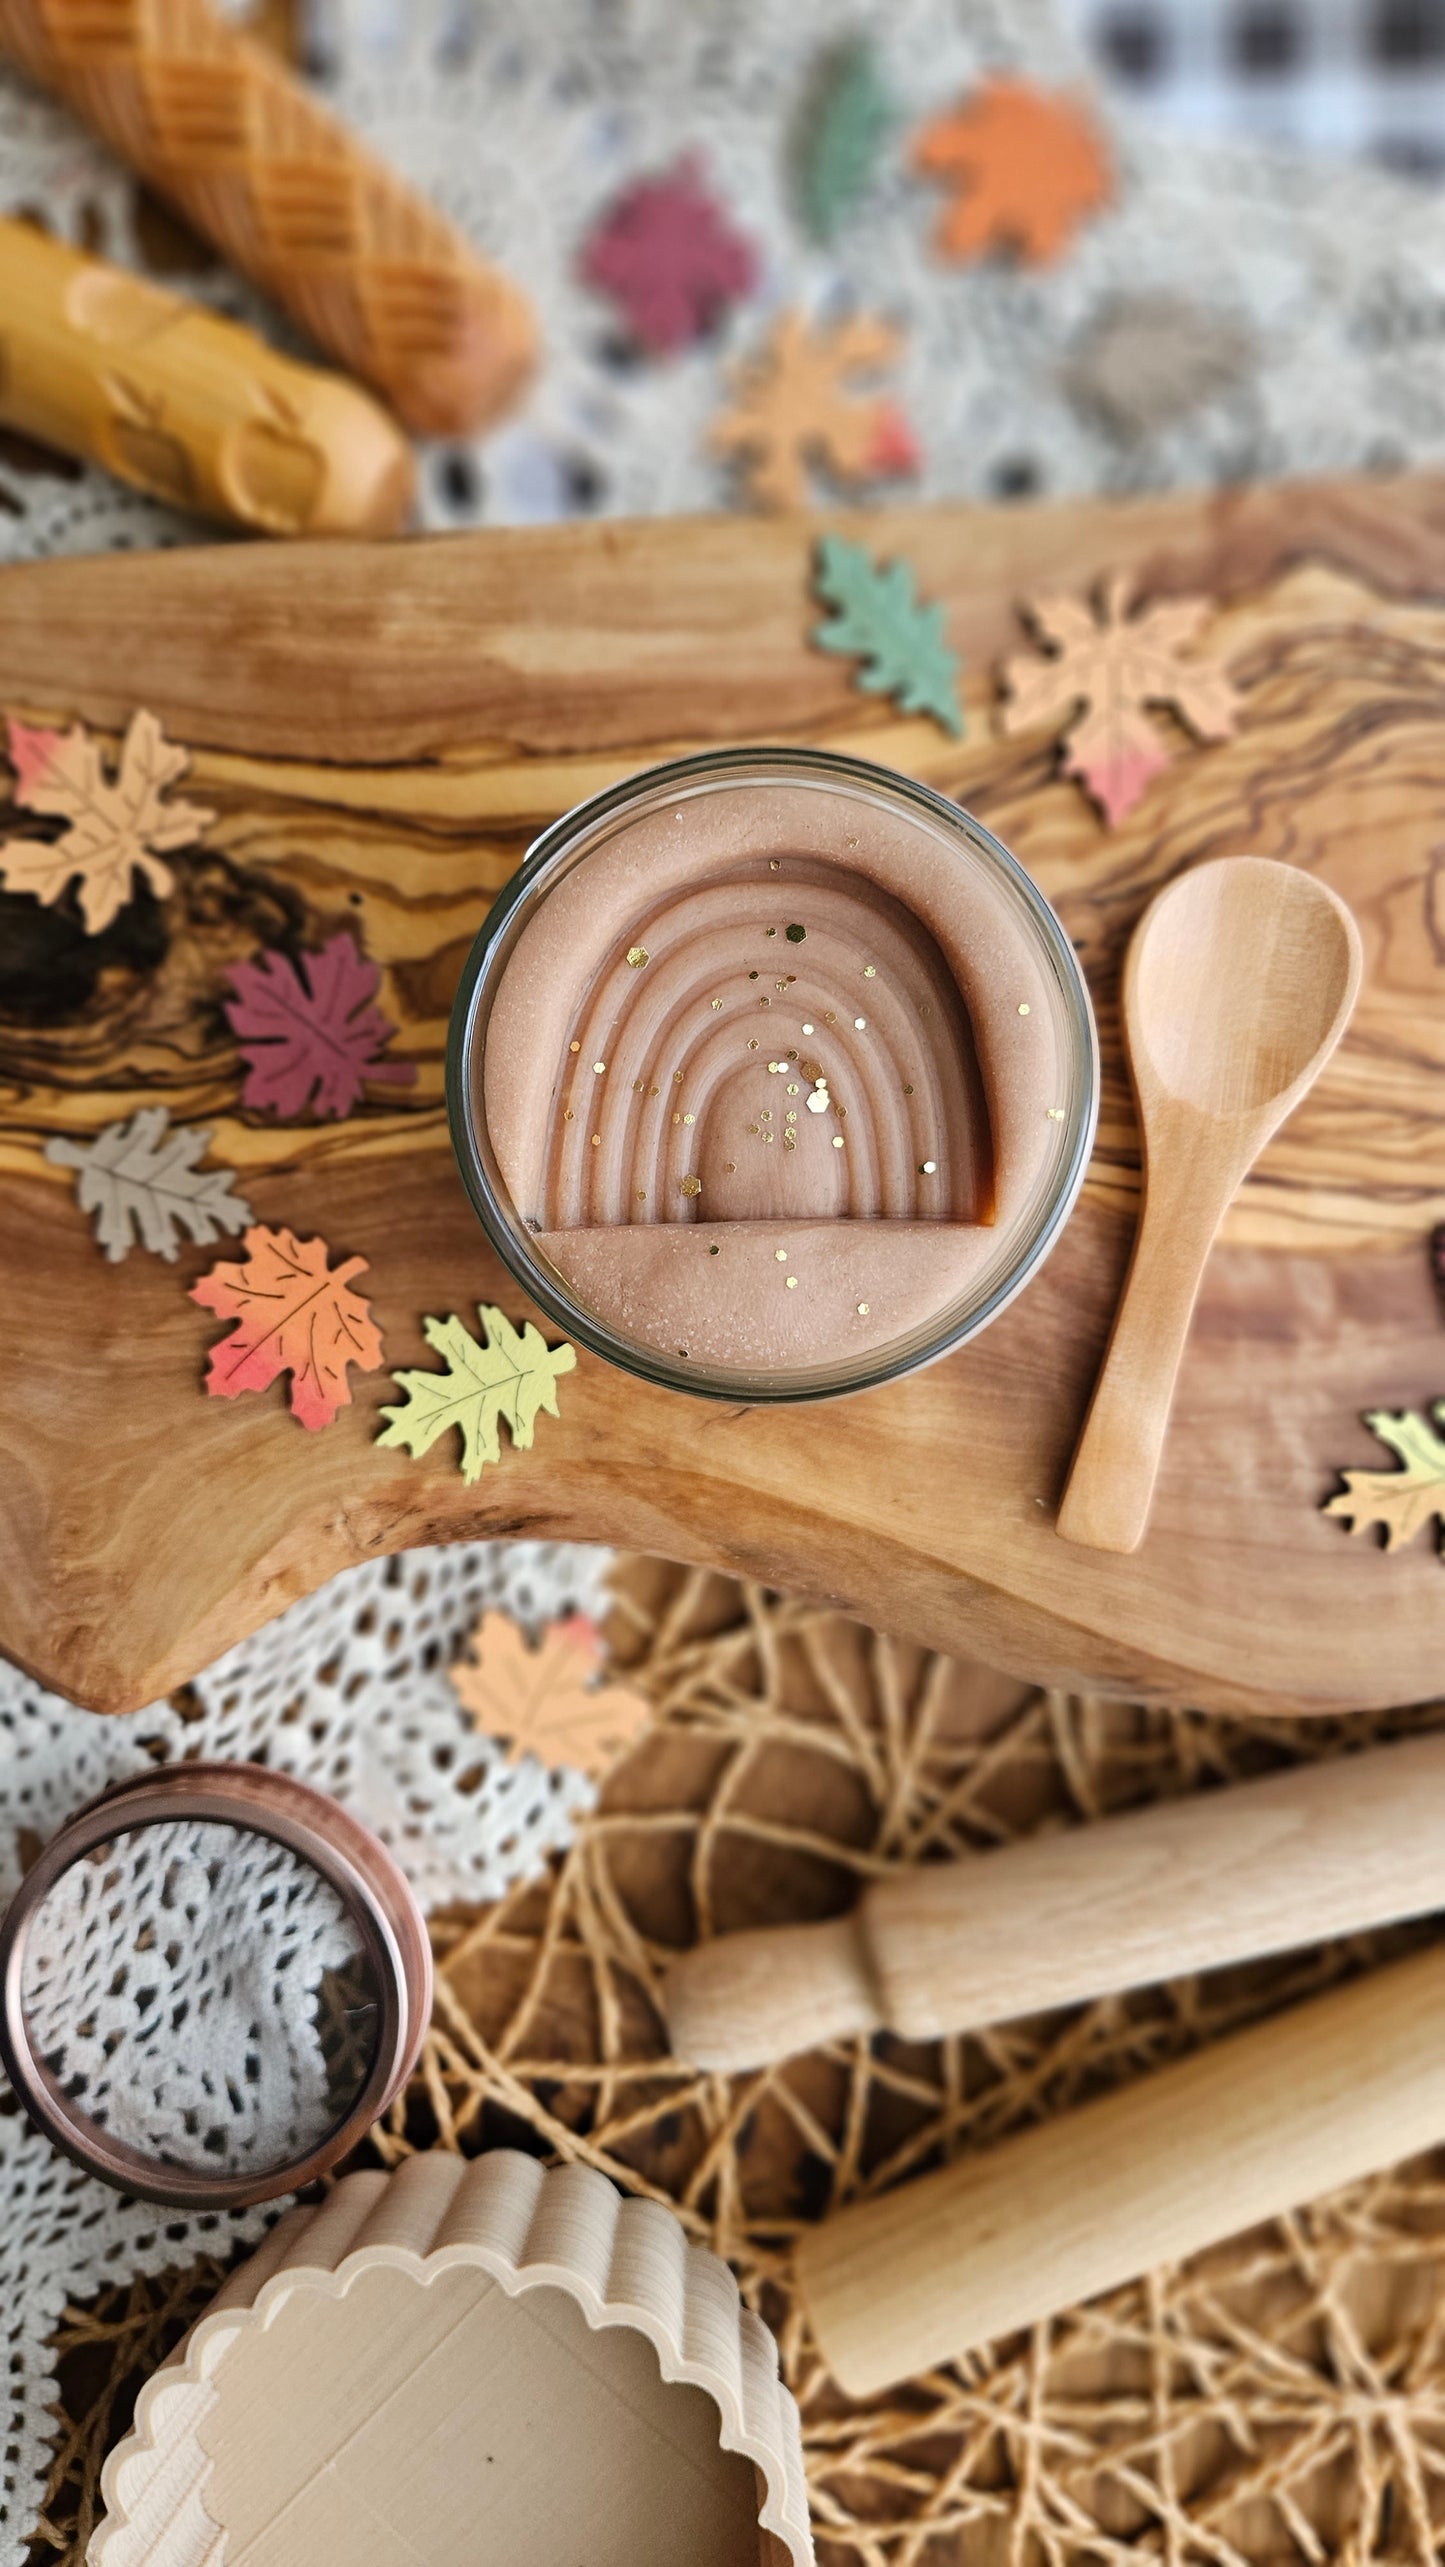 Handcrafted Cocoa Play Dough